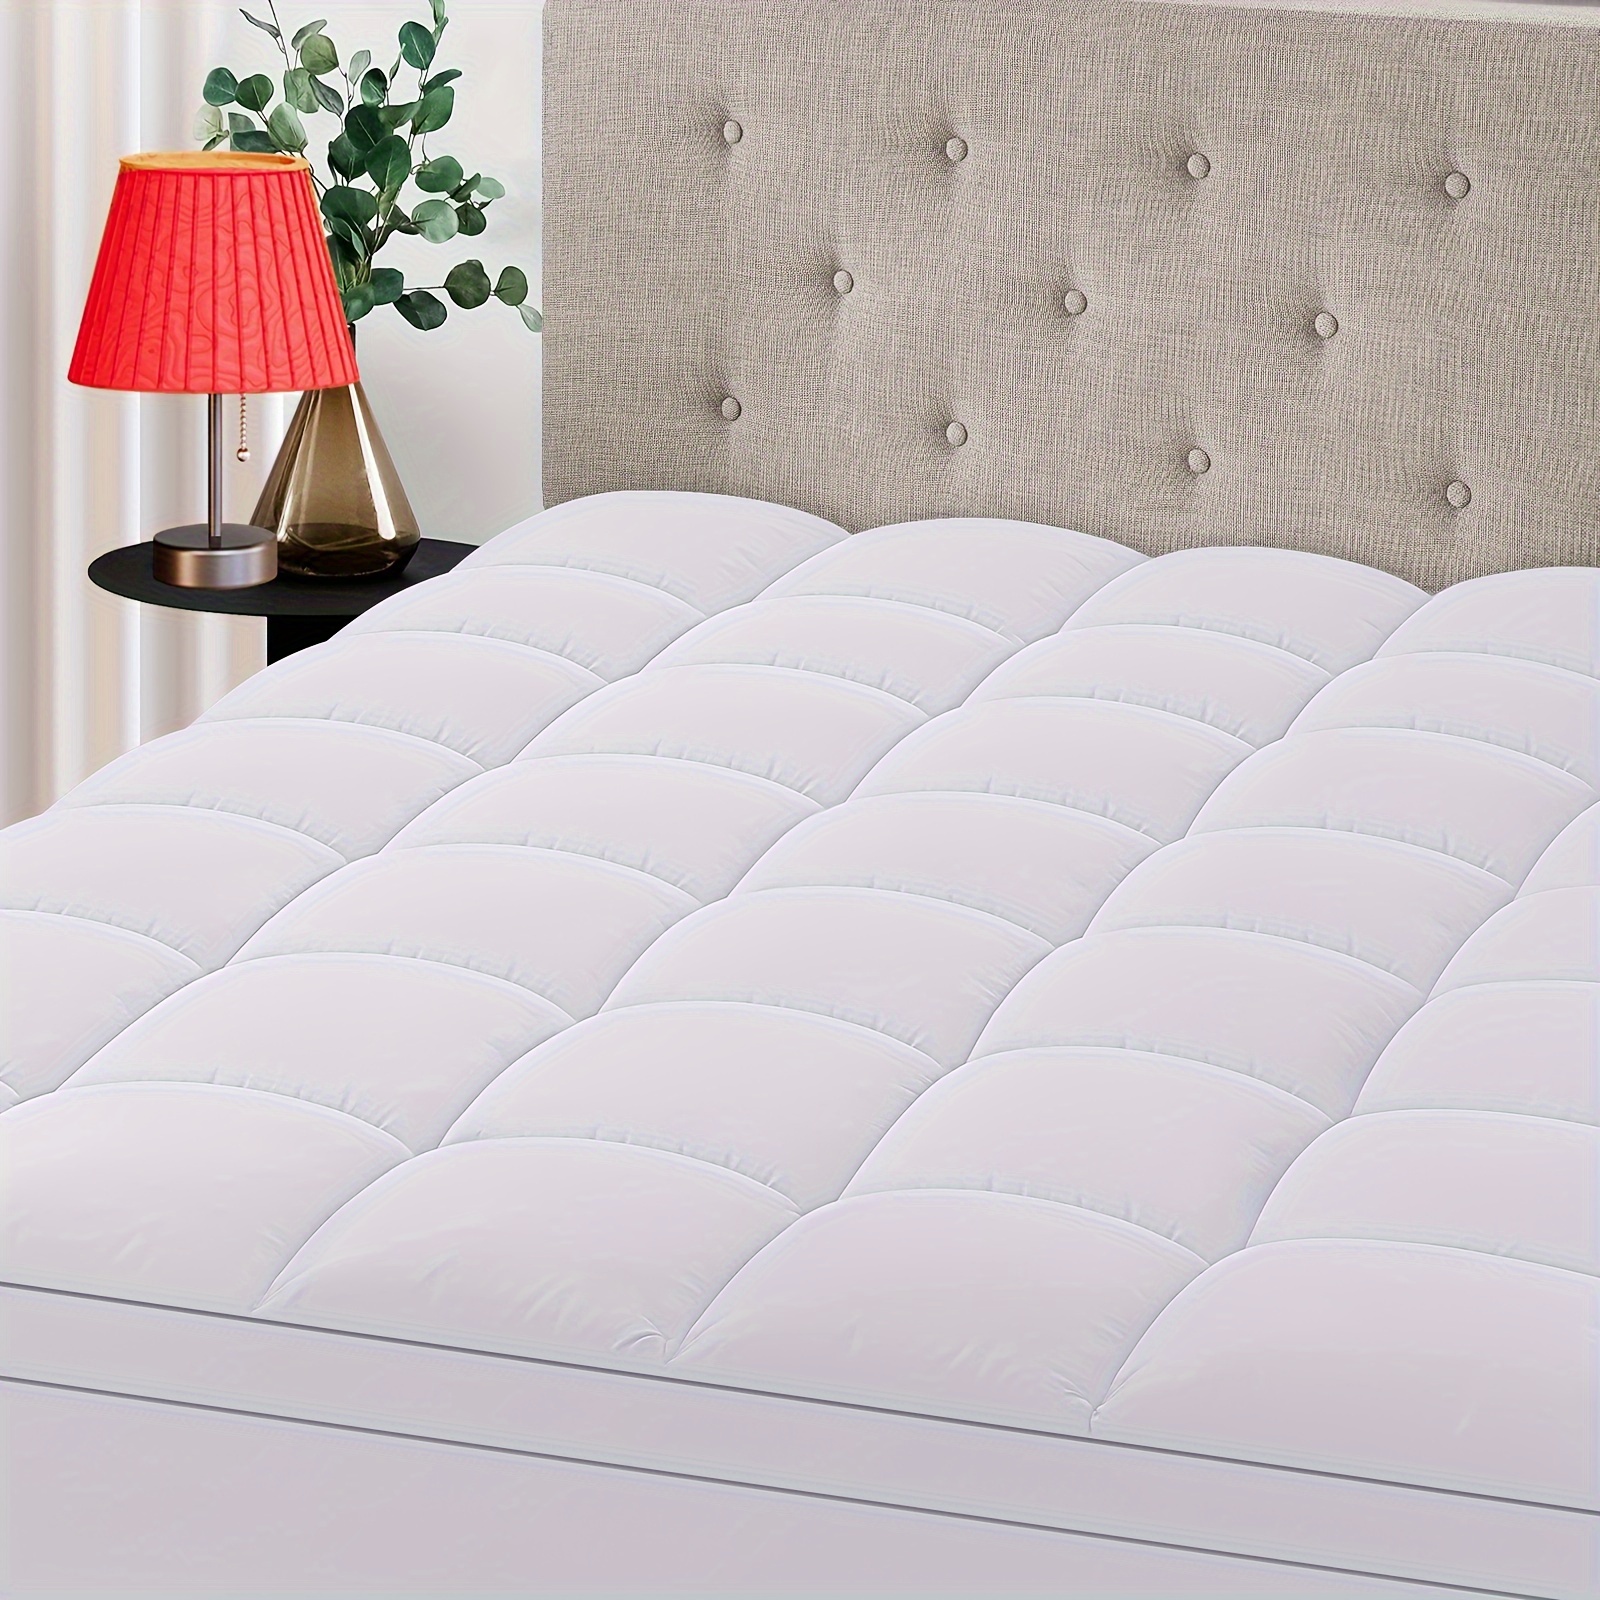 

Mattress Topper With Flat Sheet And Pillowcases - Extra Thick Mattress Pad Cover For - Soft Bedding Sheet - Overfilled Plush Pillow Top With 8-21 Inch Deep Pocket - Queen